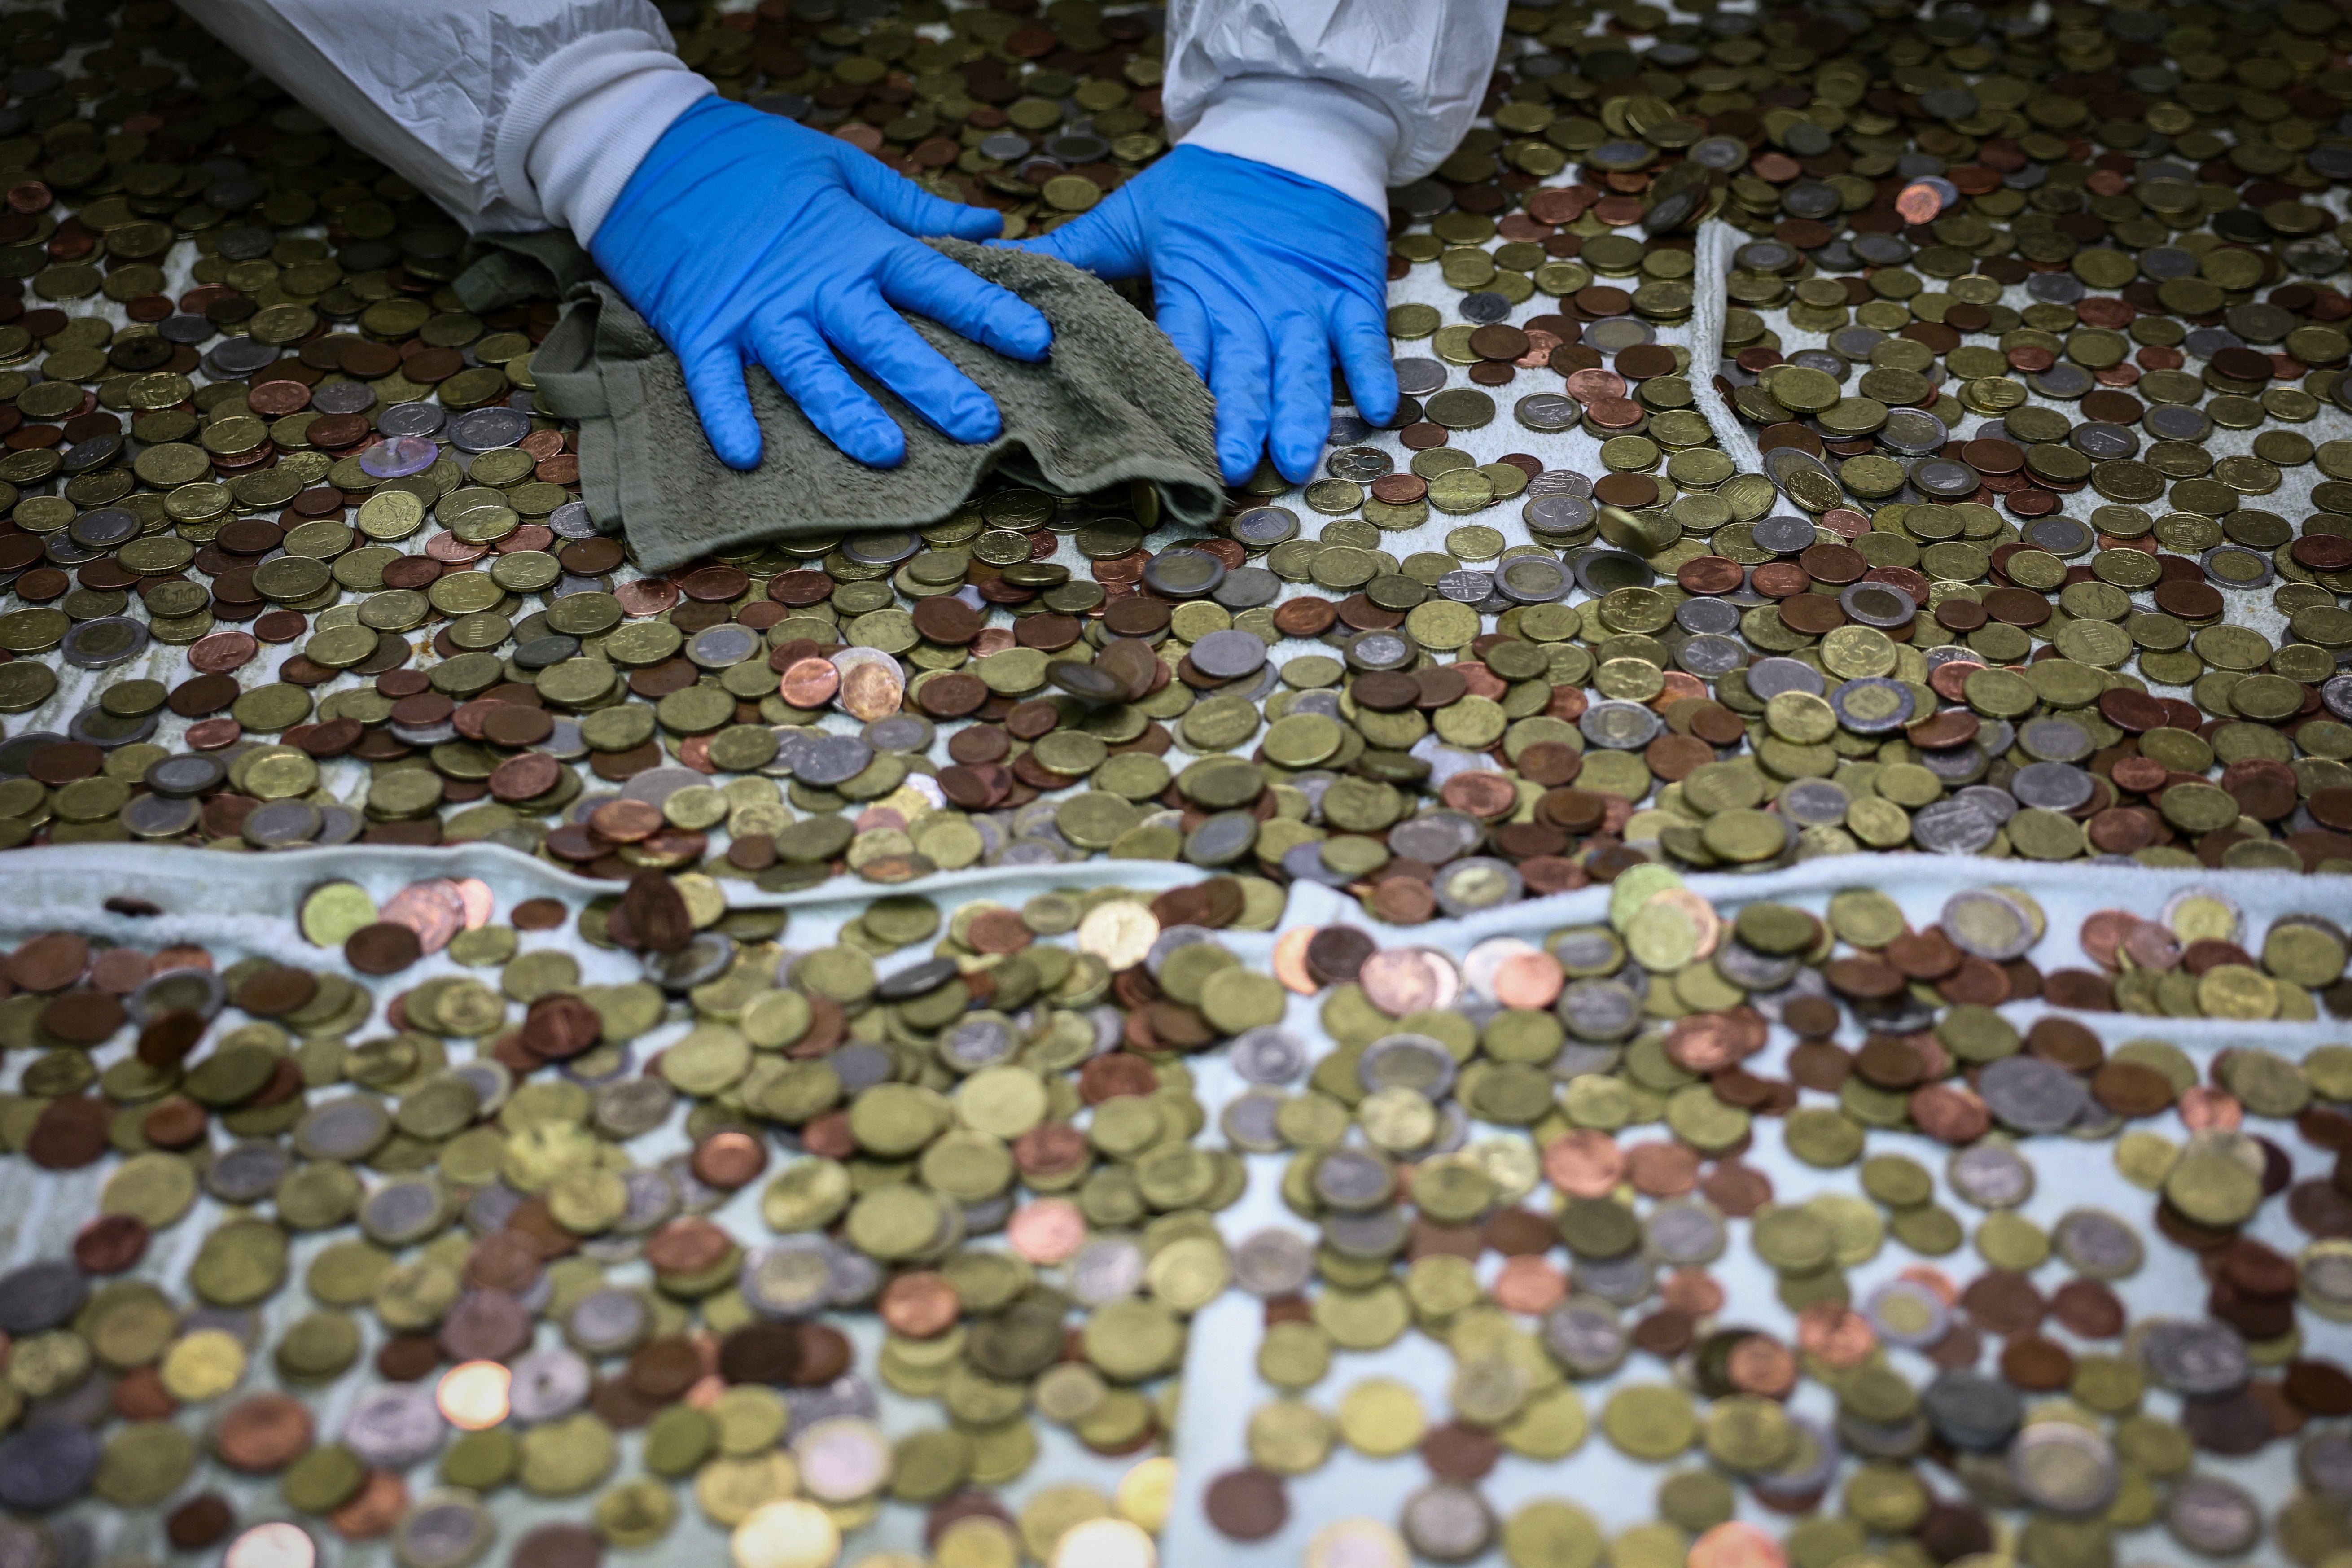 Catholic charity Caritas employee Fabrizio Marchioni, 52, dries coins collected at the Trevi Fountain